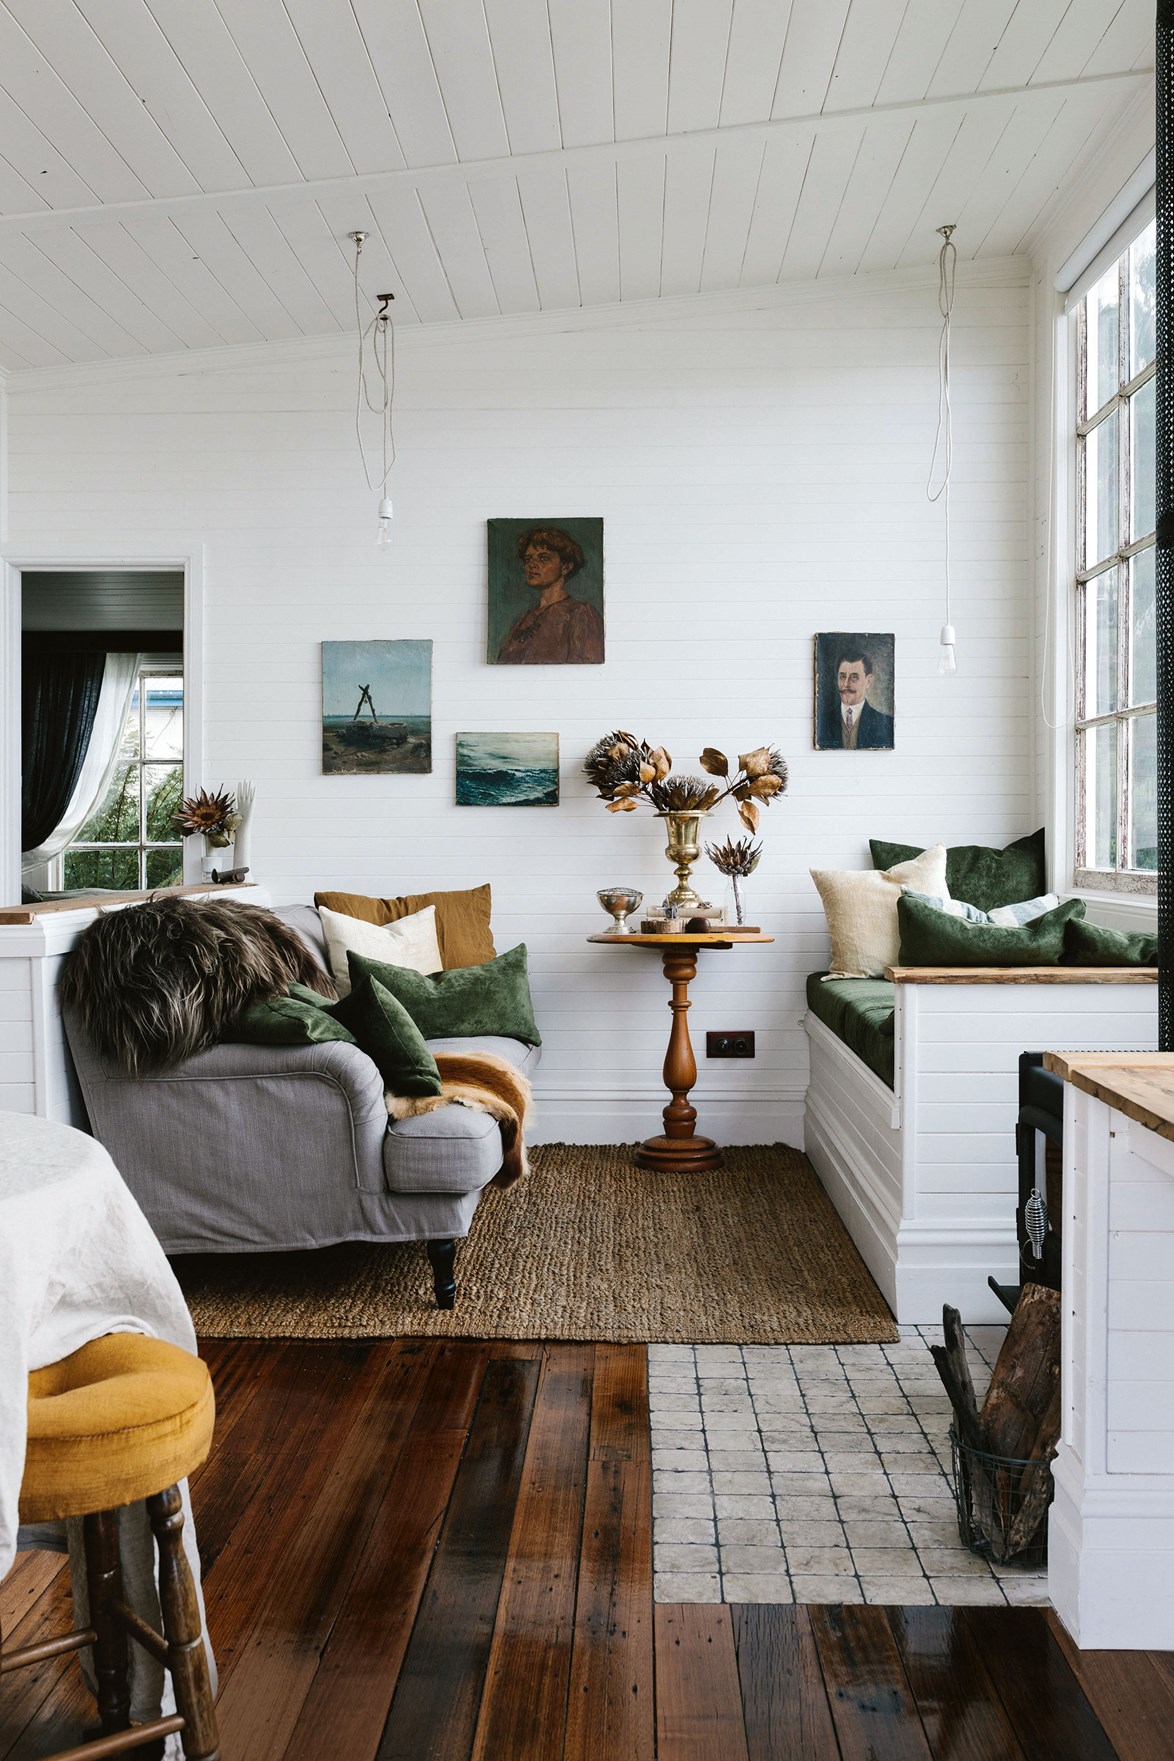 [Captains Rest](https://www.homestolove.com.au/tasmania-airbnb-captains-rest-13981|target="_blank") — a cosy, one-bedroom Airbnb cottage in Lettes Bay, Strahan, about 208 kilometres south-west of Devonport — is a refuge for owner and sailor Sarah Andrews, and one she's happy to share. While you may not be able to travel to Tasmania right now, be sure to visit when you can and, in the meantime, draw inspiration from the cabin's calm and collected interiors.